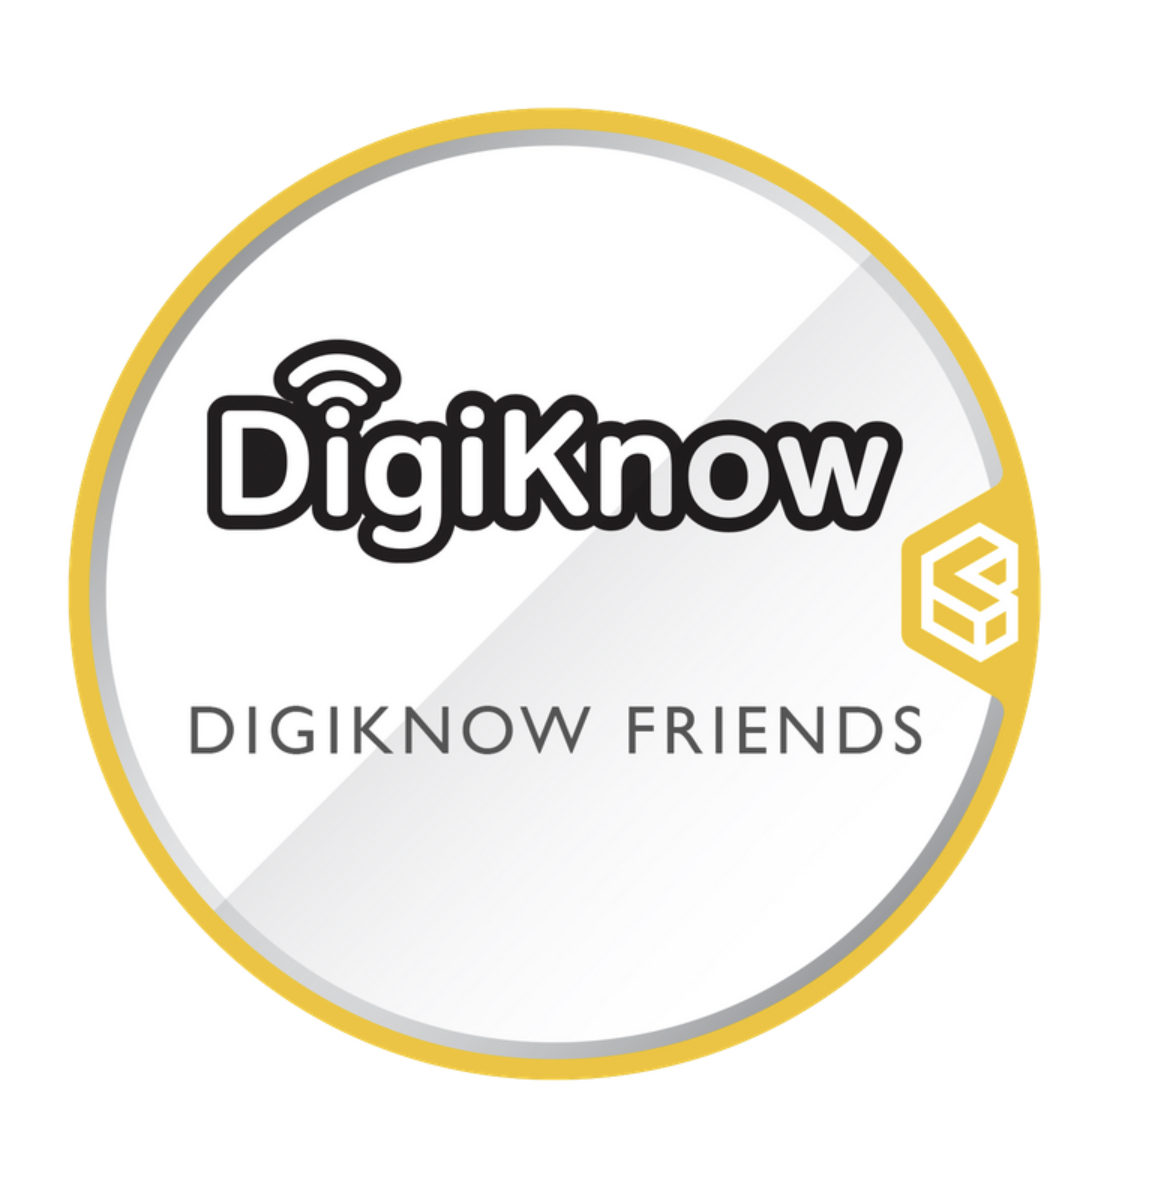 [DigiKnow]logo and the words DIGIKNOW FRIENDS within a circle